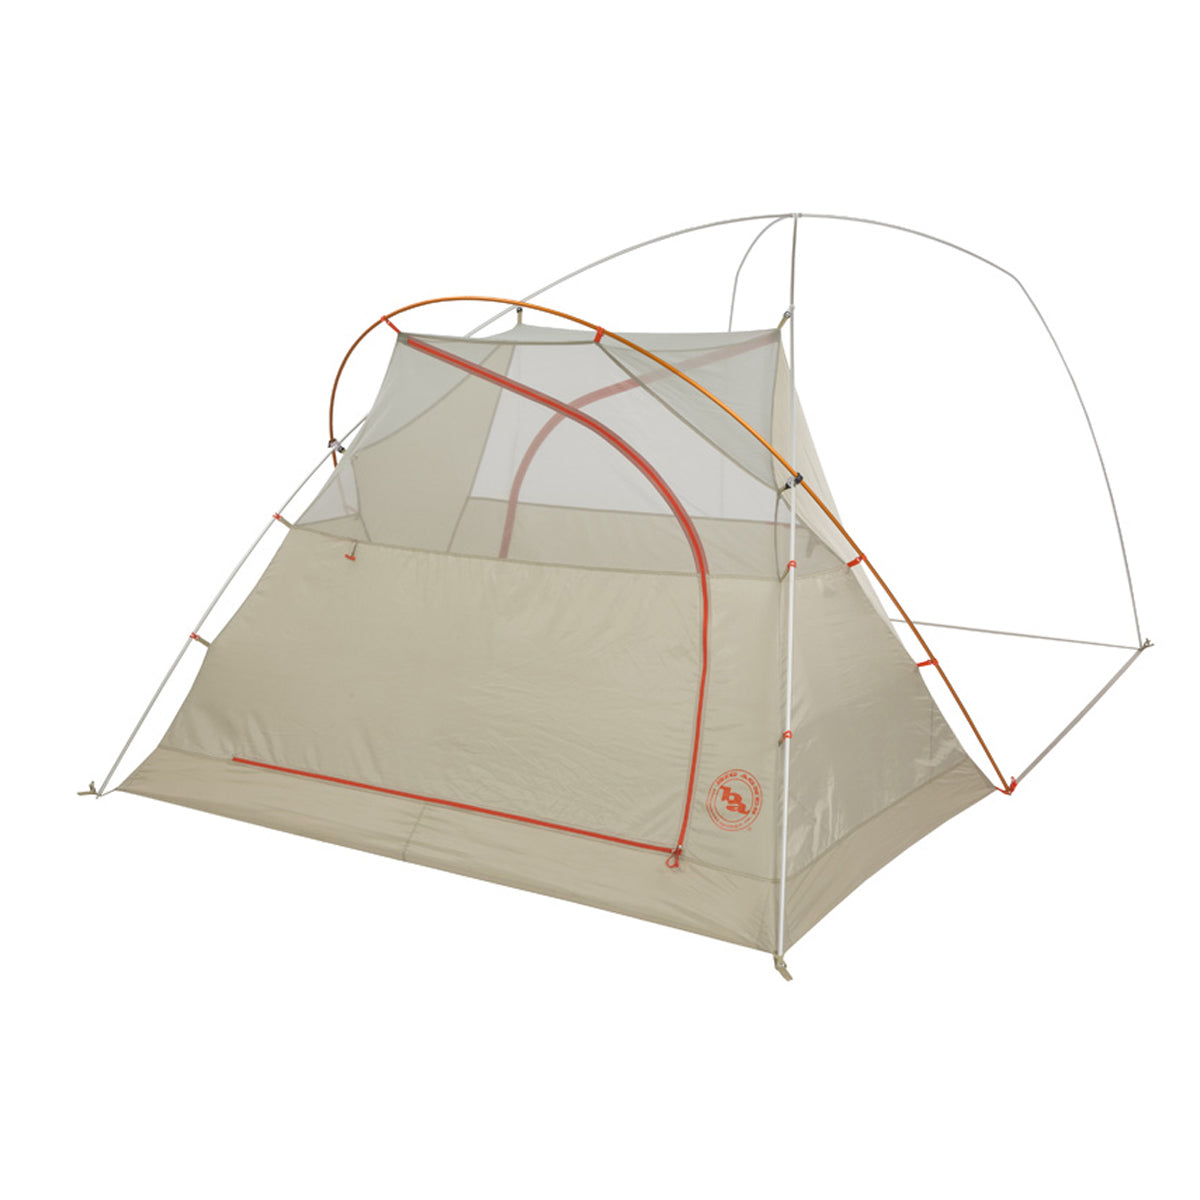 Big Agnes Wyoming Trail 2 Person Tent